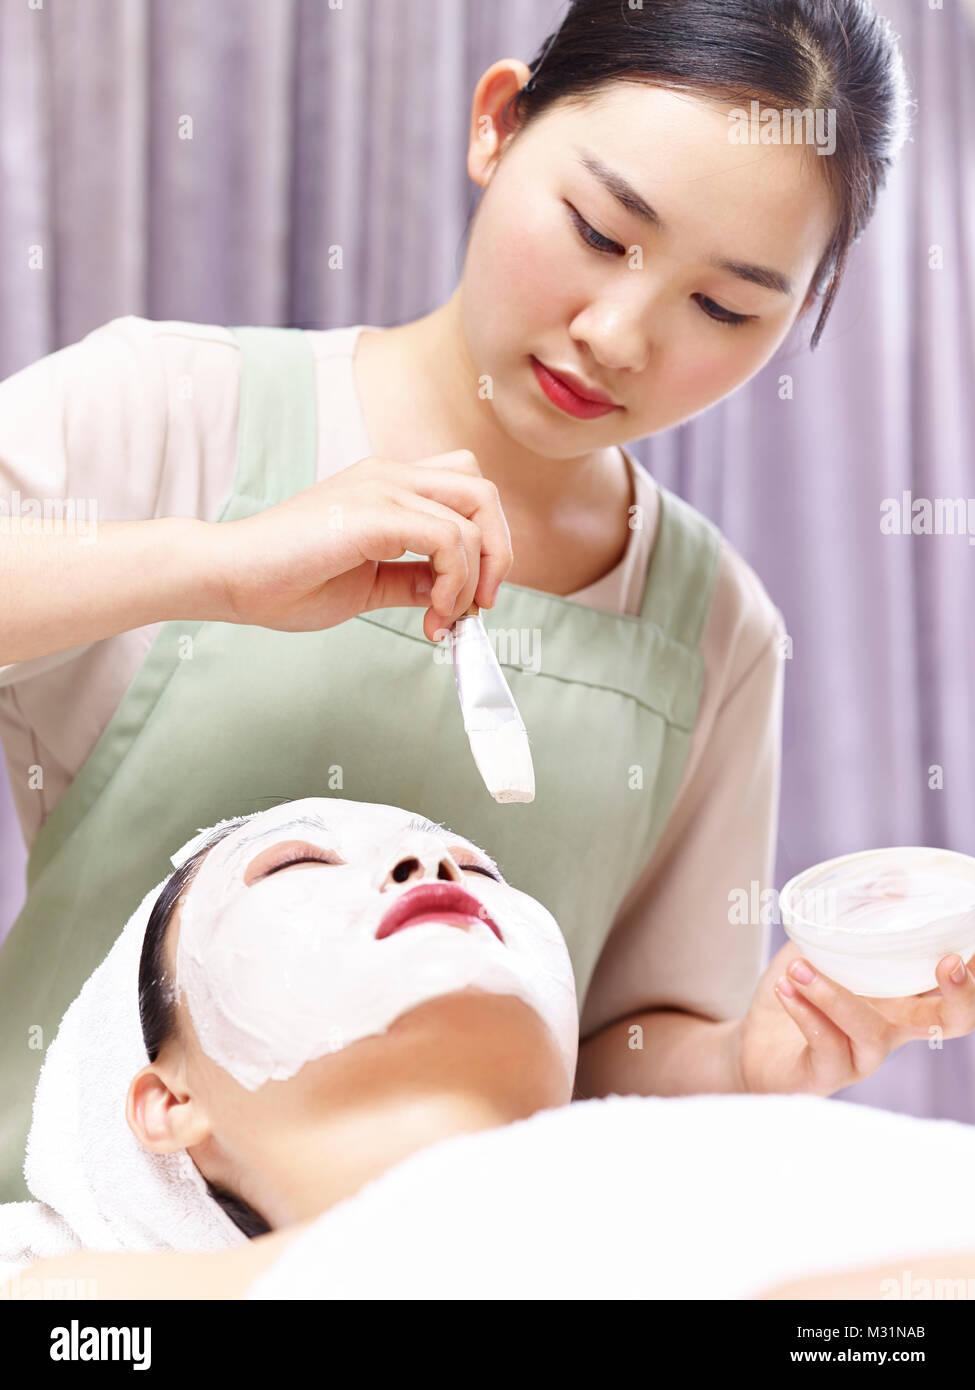 asian beautician applying white facial mask with a brush on face of a young woman. Stock Photo